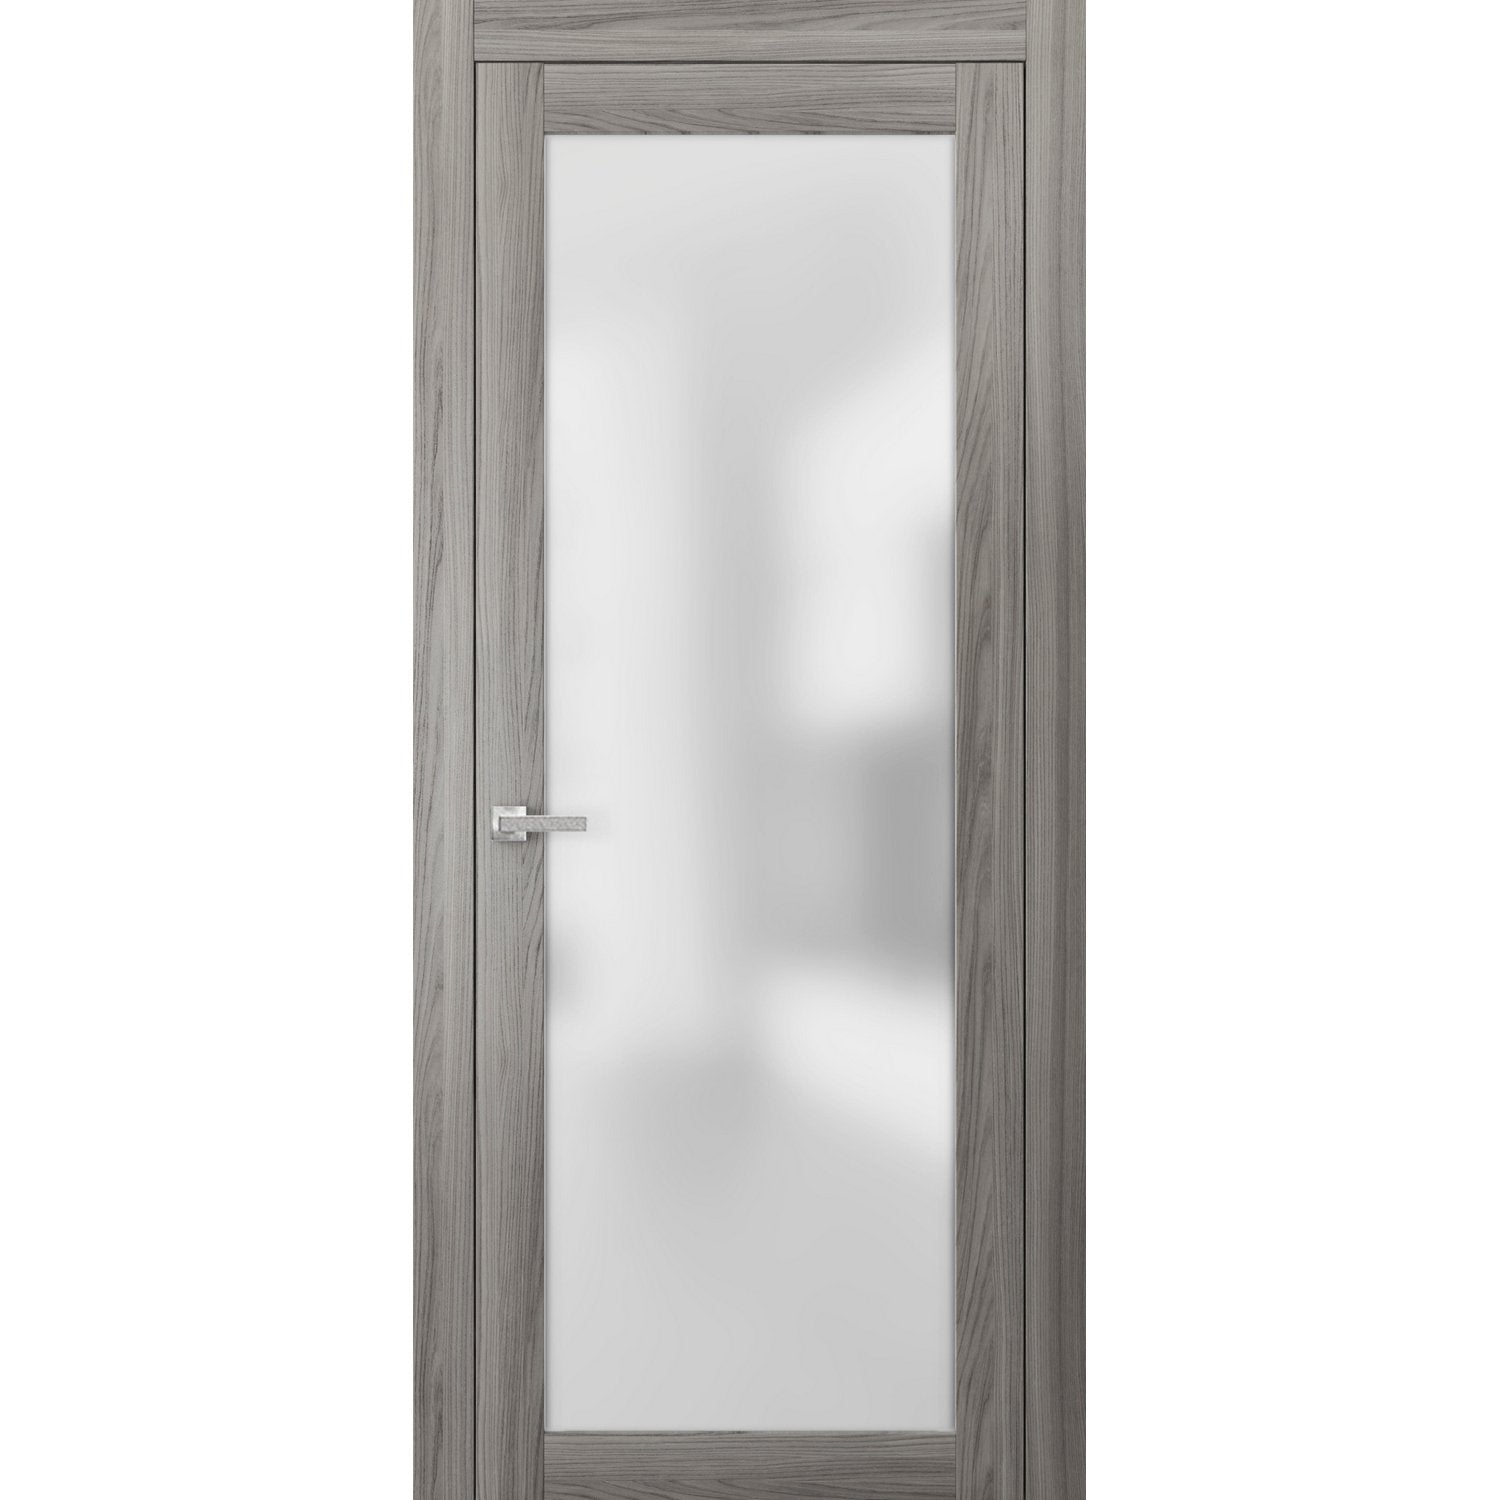 Solid French Door | Planum 2102 Ginger Ash with Frosted Glass | Single Regular Panel Frame Trims Handle | Bathroom Bedroom Sturdy Doors